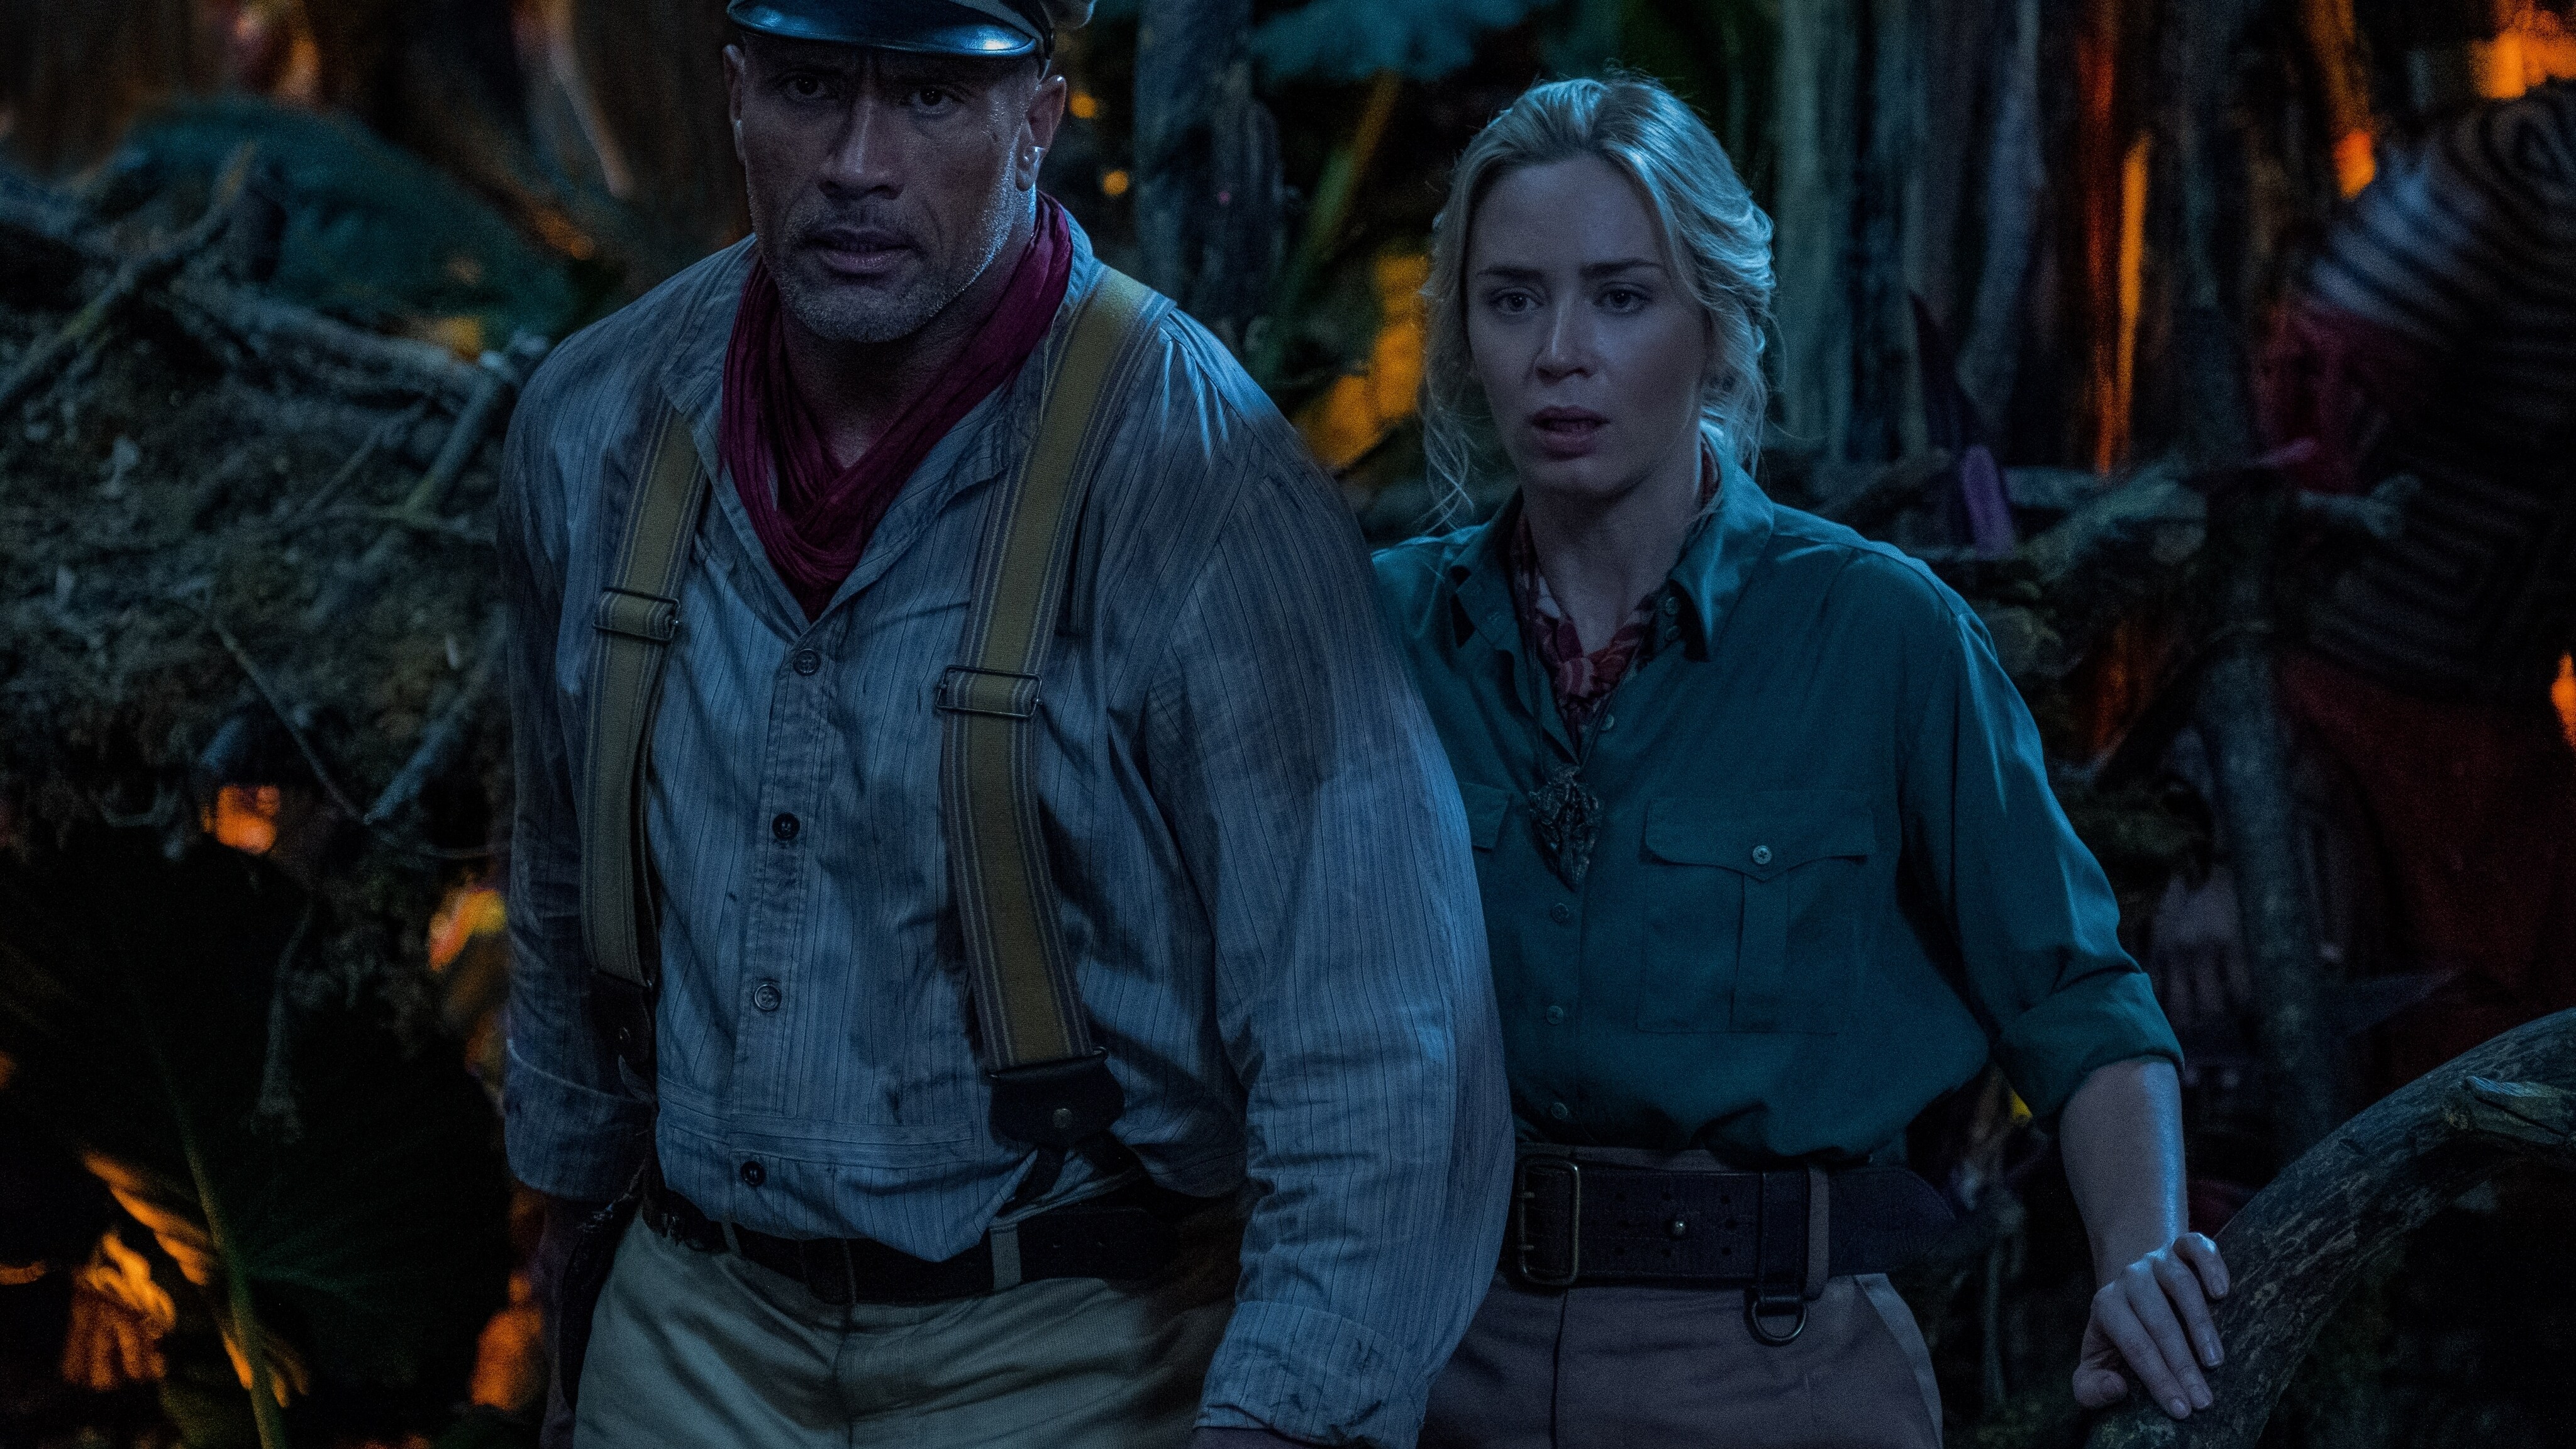 Dwayne Johnson is Frank Wolff and Emily Blunt is Lily Houghton in Disney’s JUNGLE CRUISE. Photo by Frank Masi. © 2021 Disney Enterprises, Inc. All Rights Reserved.